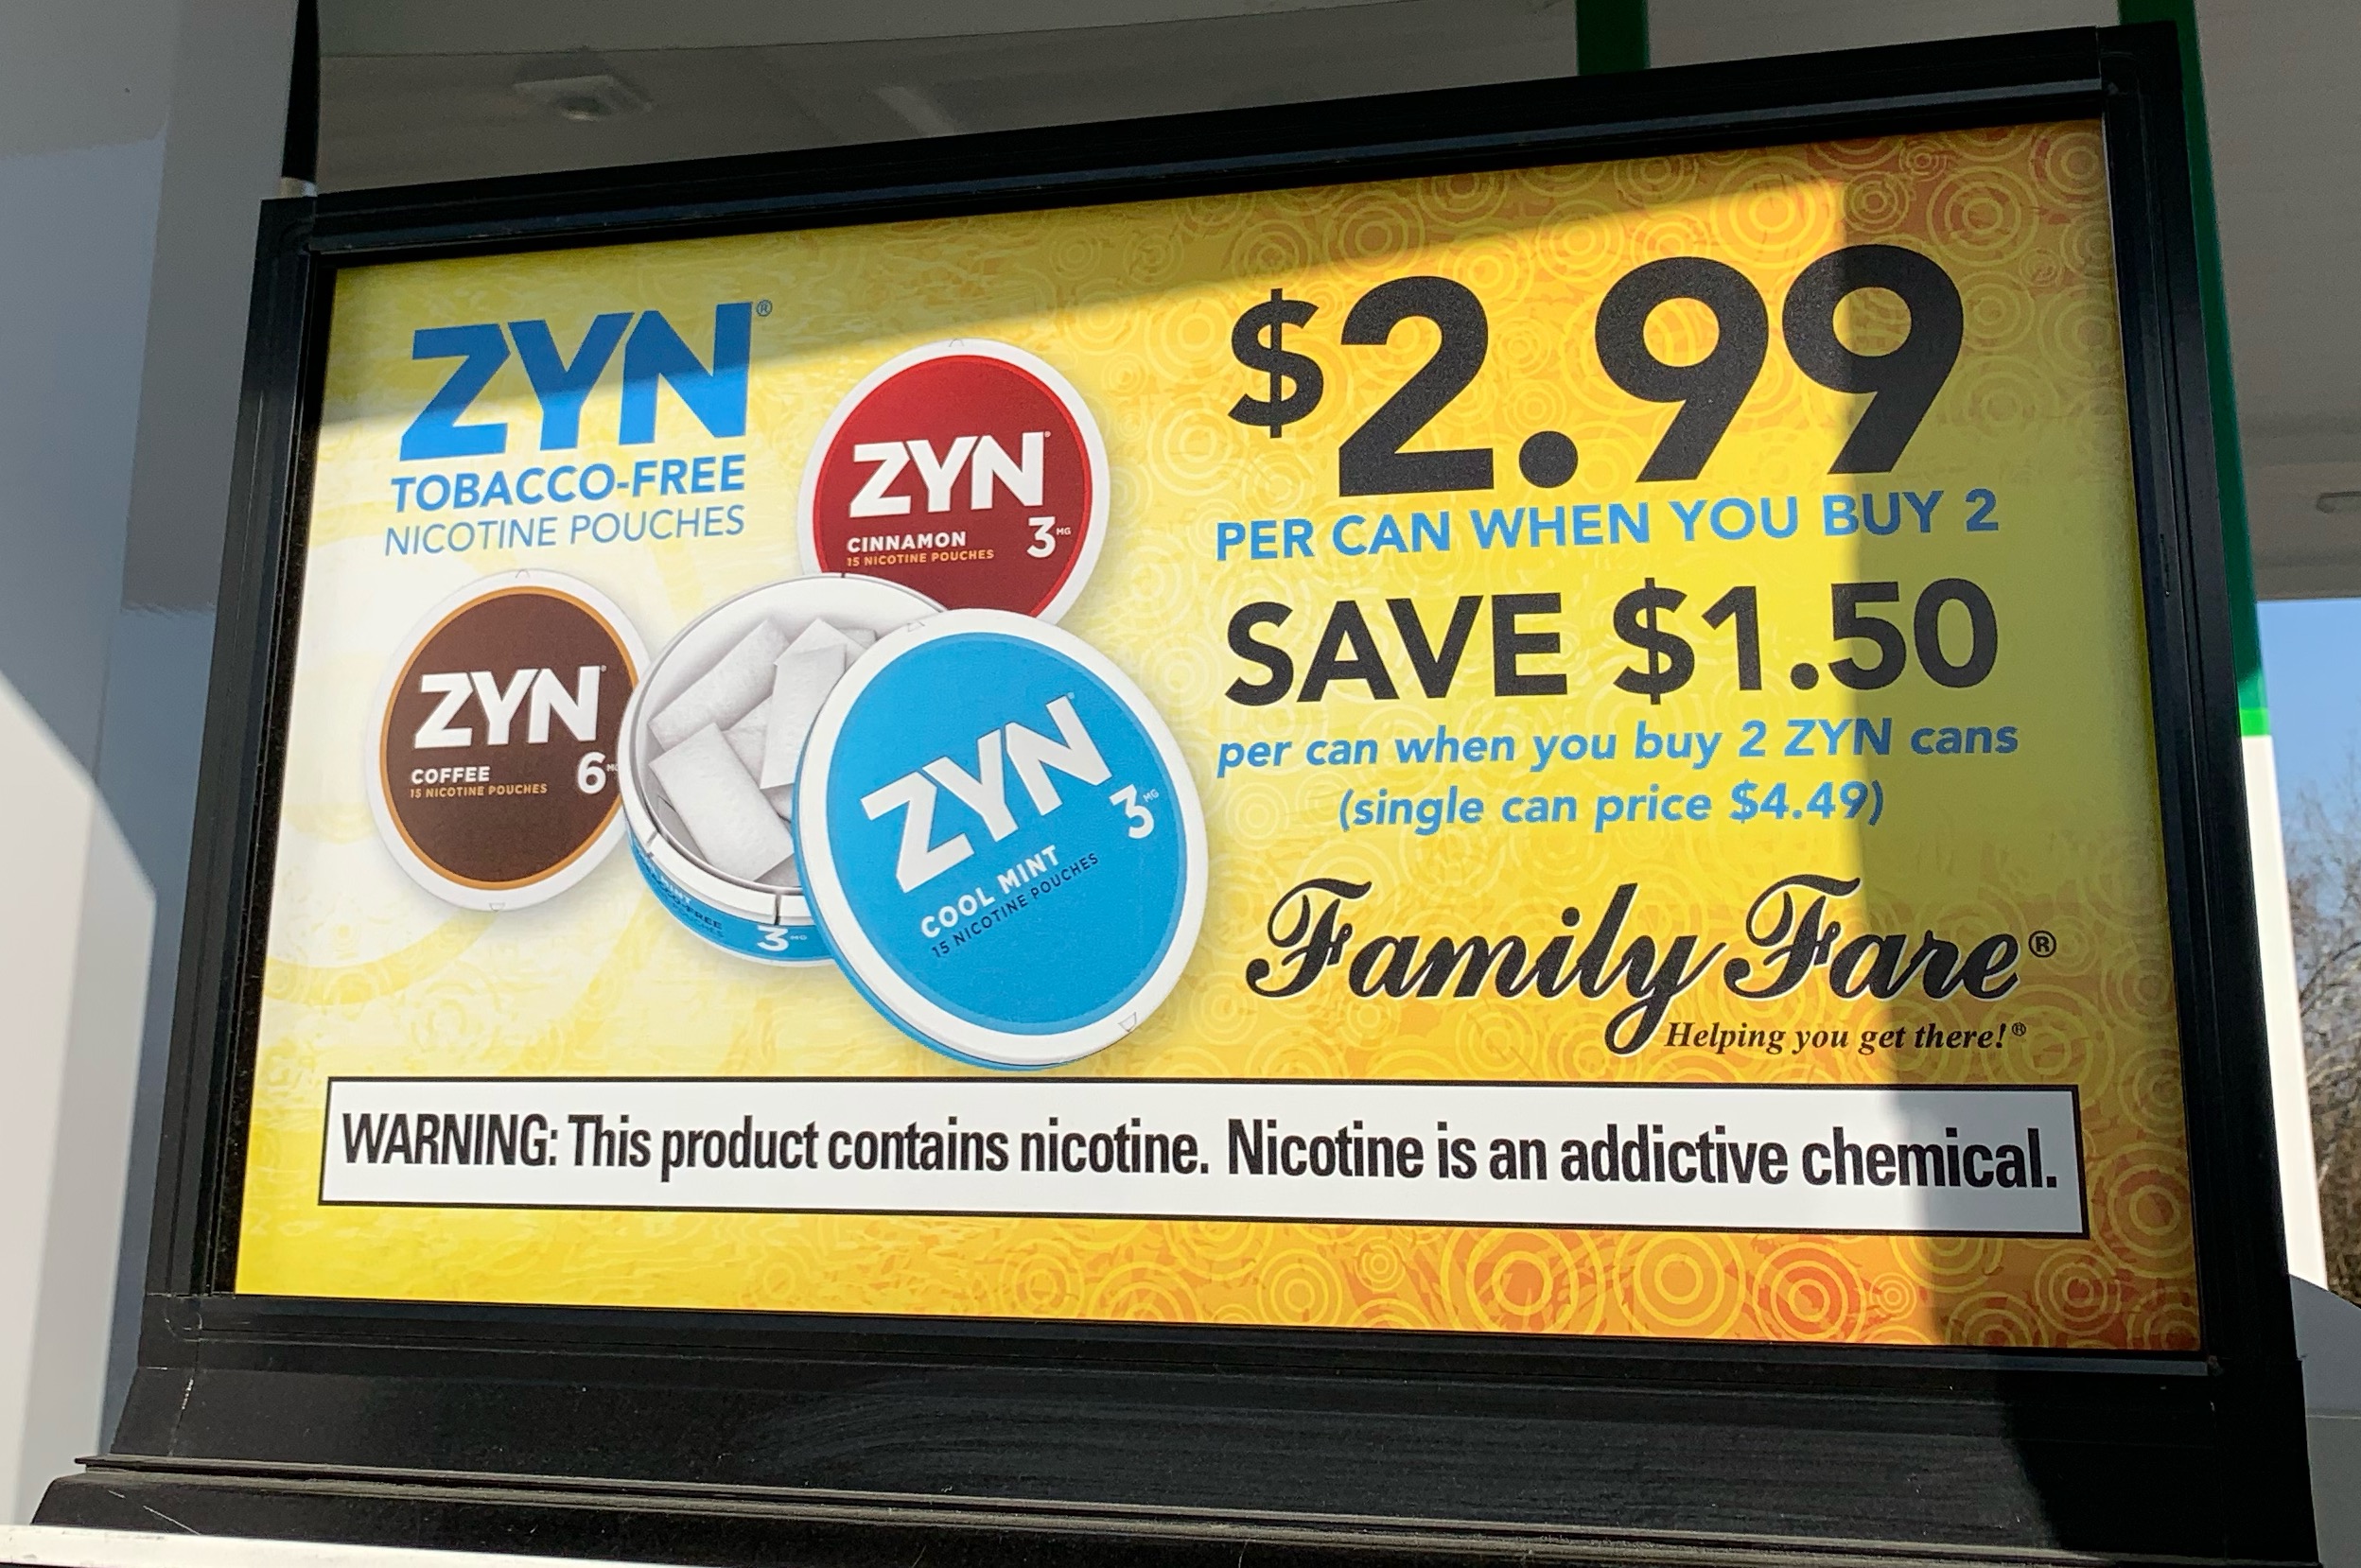 gas pump topper ad for Zyn with price discounts 